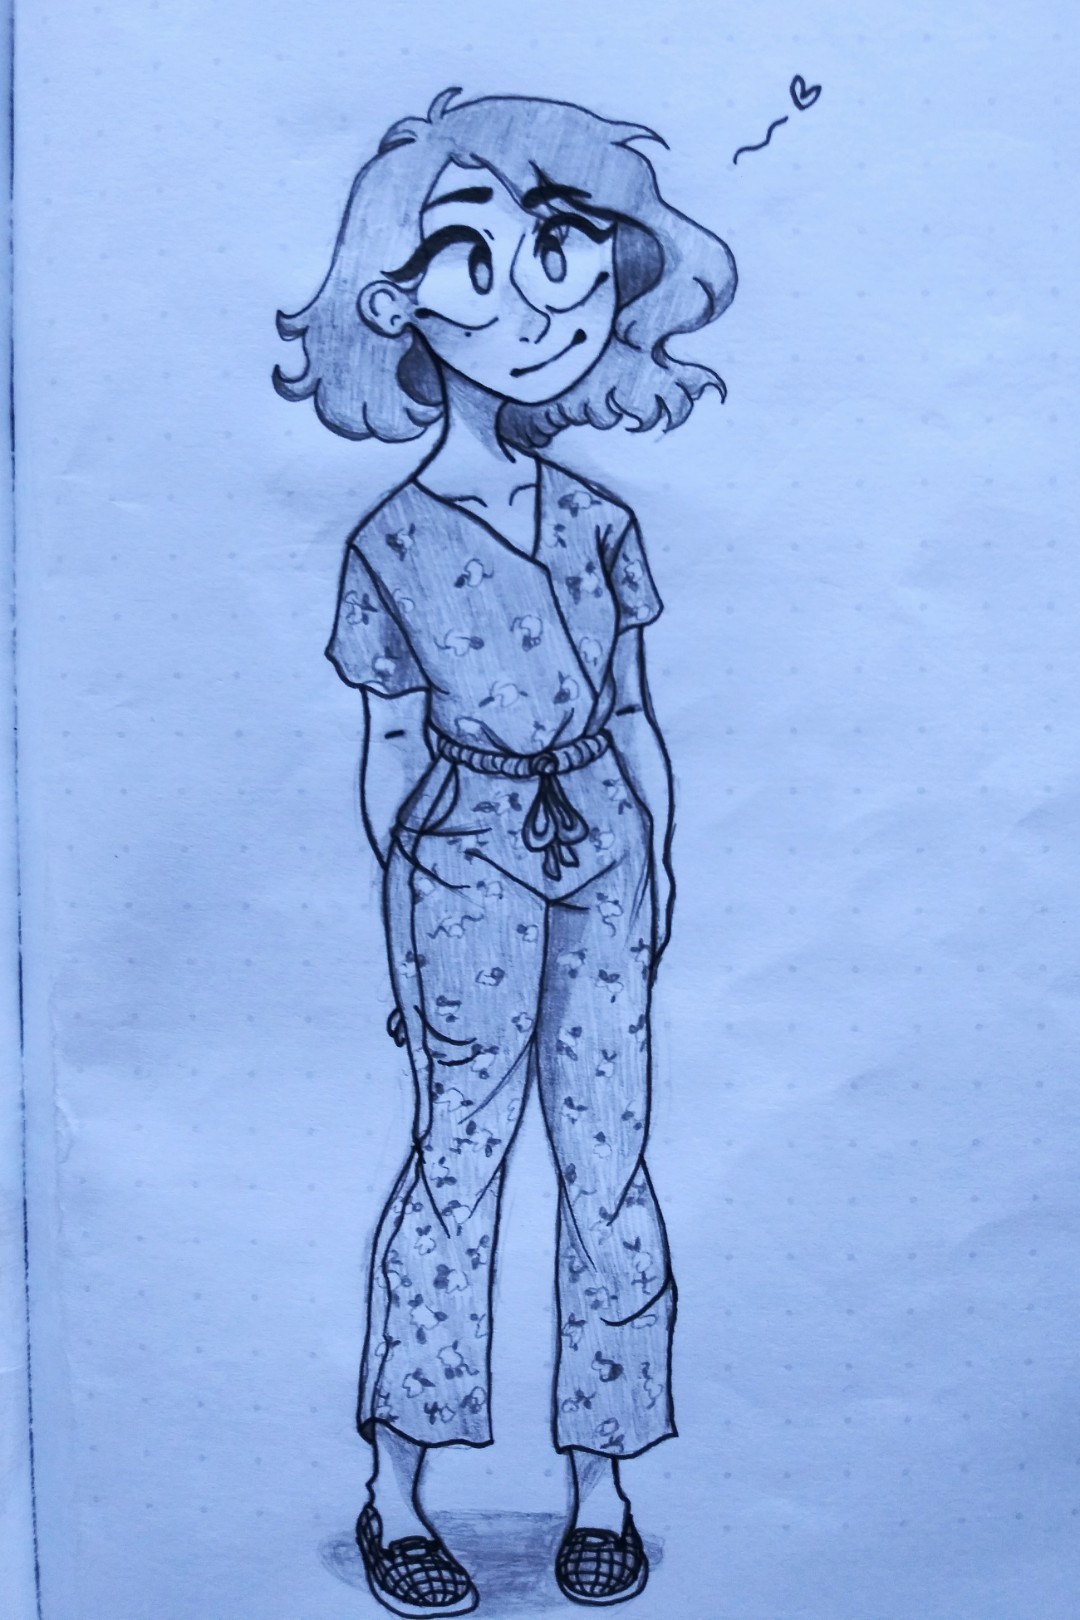 Drew this on my last day of school when I had extra time after finishing my English final. It me! Whack